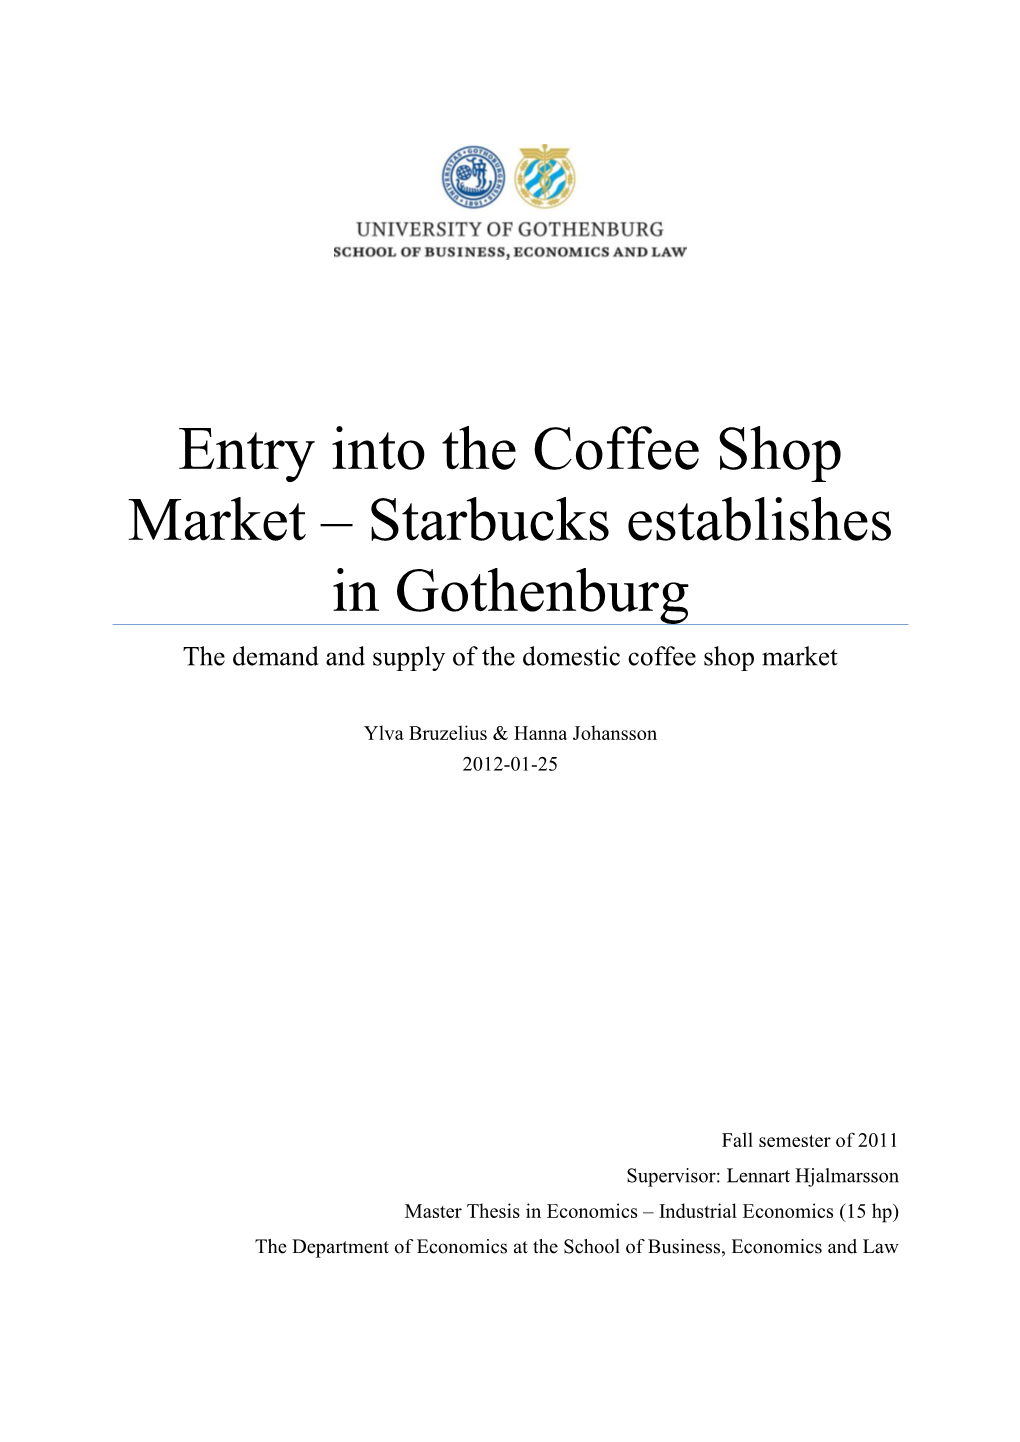 Entry Into the Coffee Shop Market – Starbucks Establishes in Gothenburg the Demand and Supply of the Domestic Coffee Shop Market